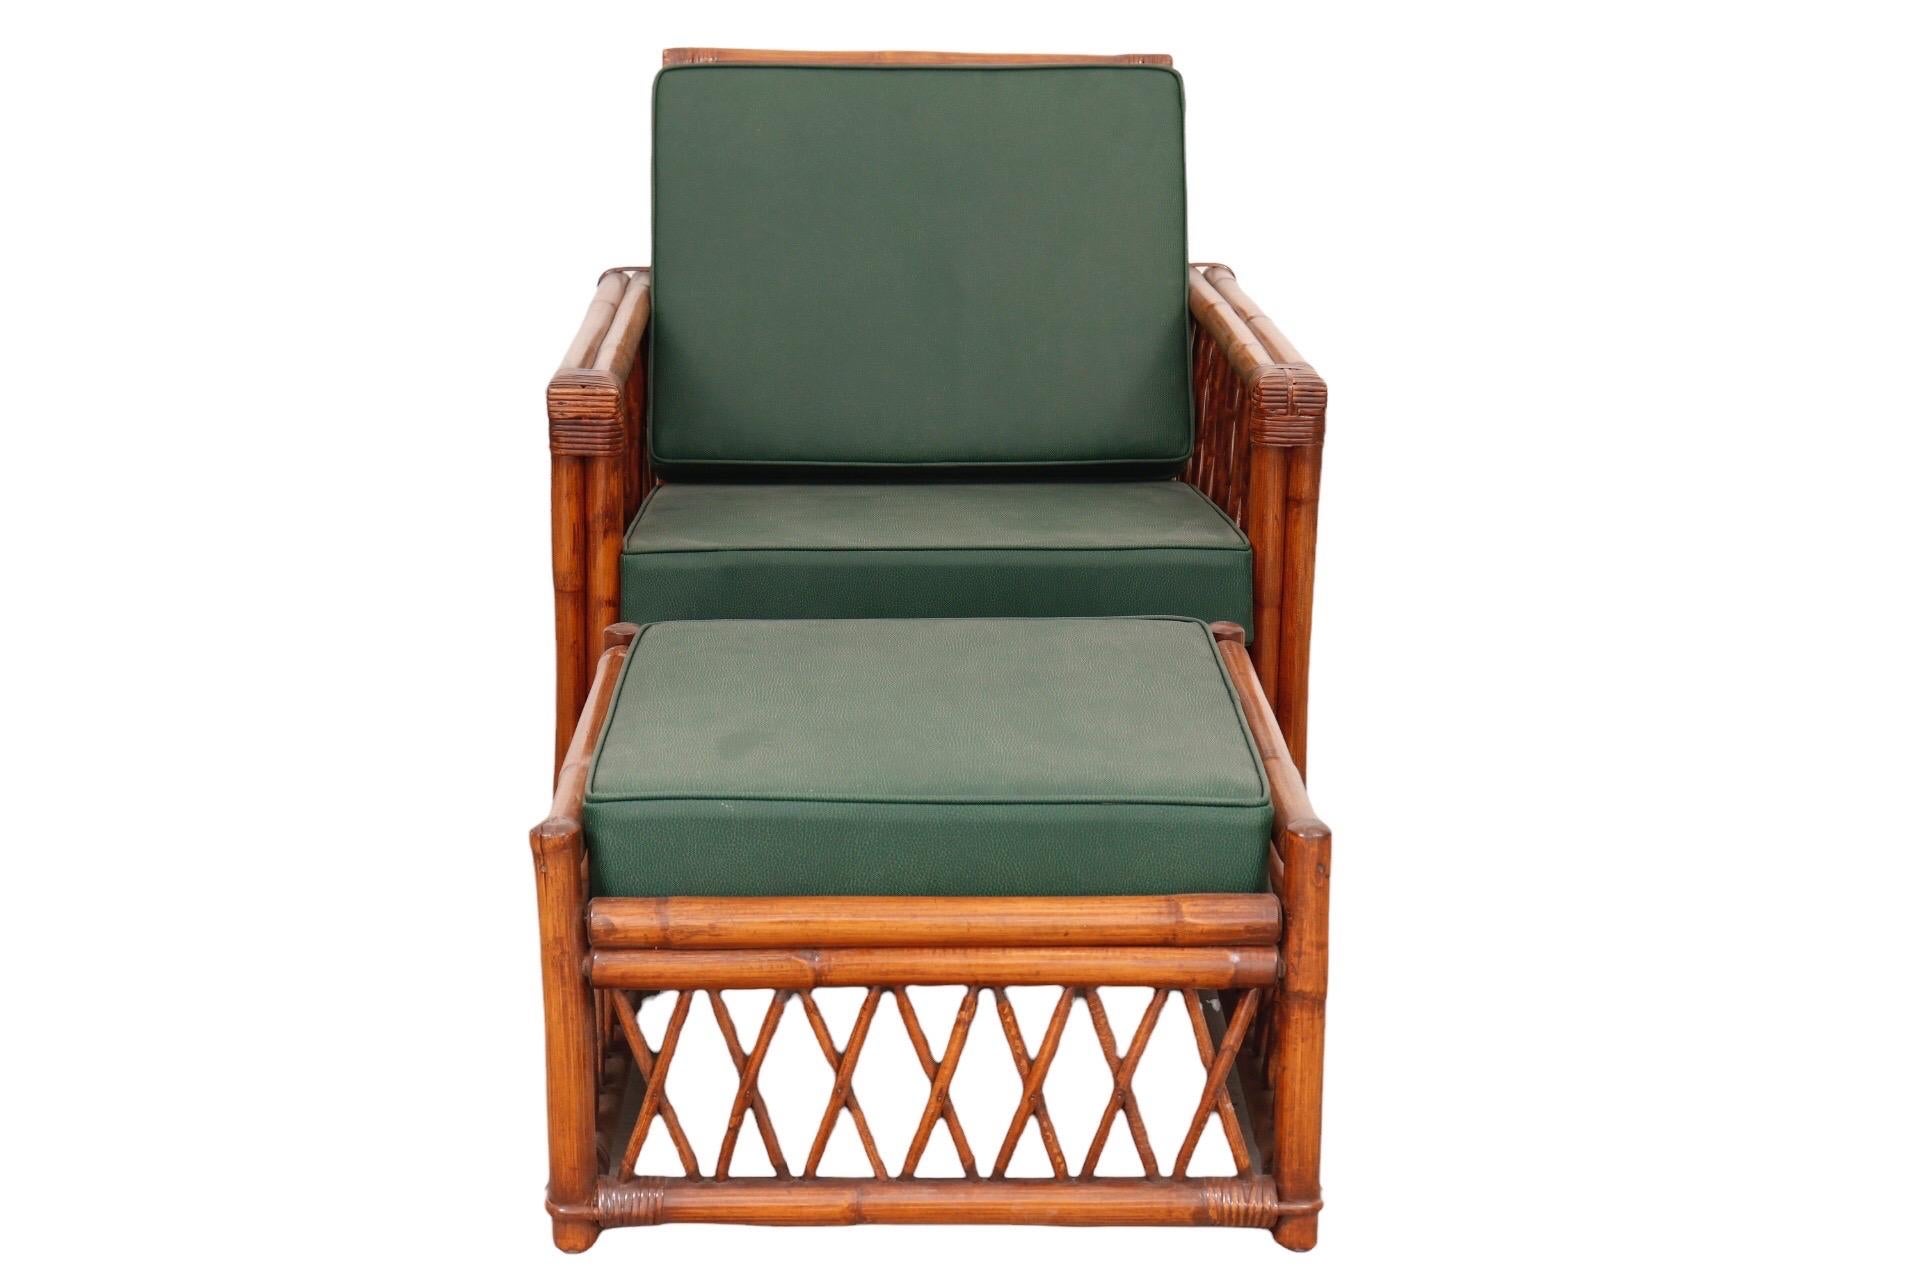 A Bamboo lounge chair and ottoman made by Ficks Reed. The square frame in double bamboo is secured with rattan wrapping at the joins, sides are decorated with a diamond rattan lattice. Newly upholstered with high density foam cushions in a forest